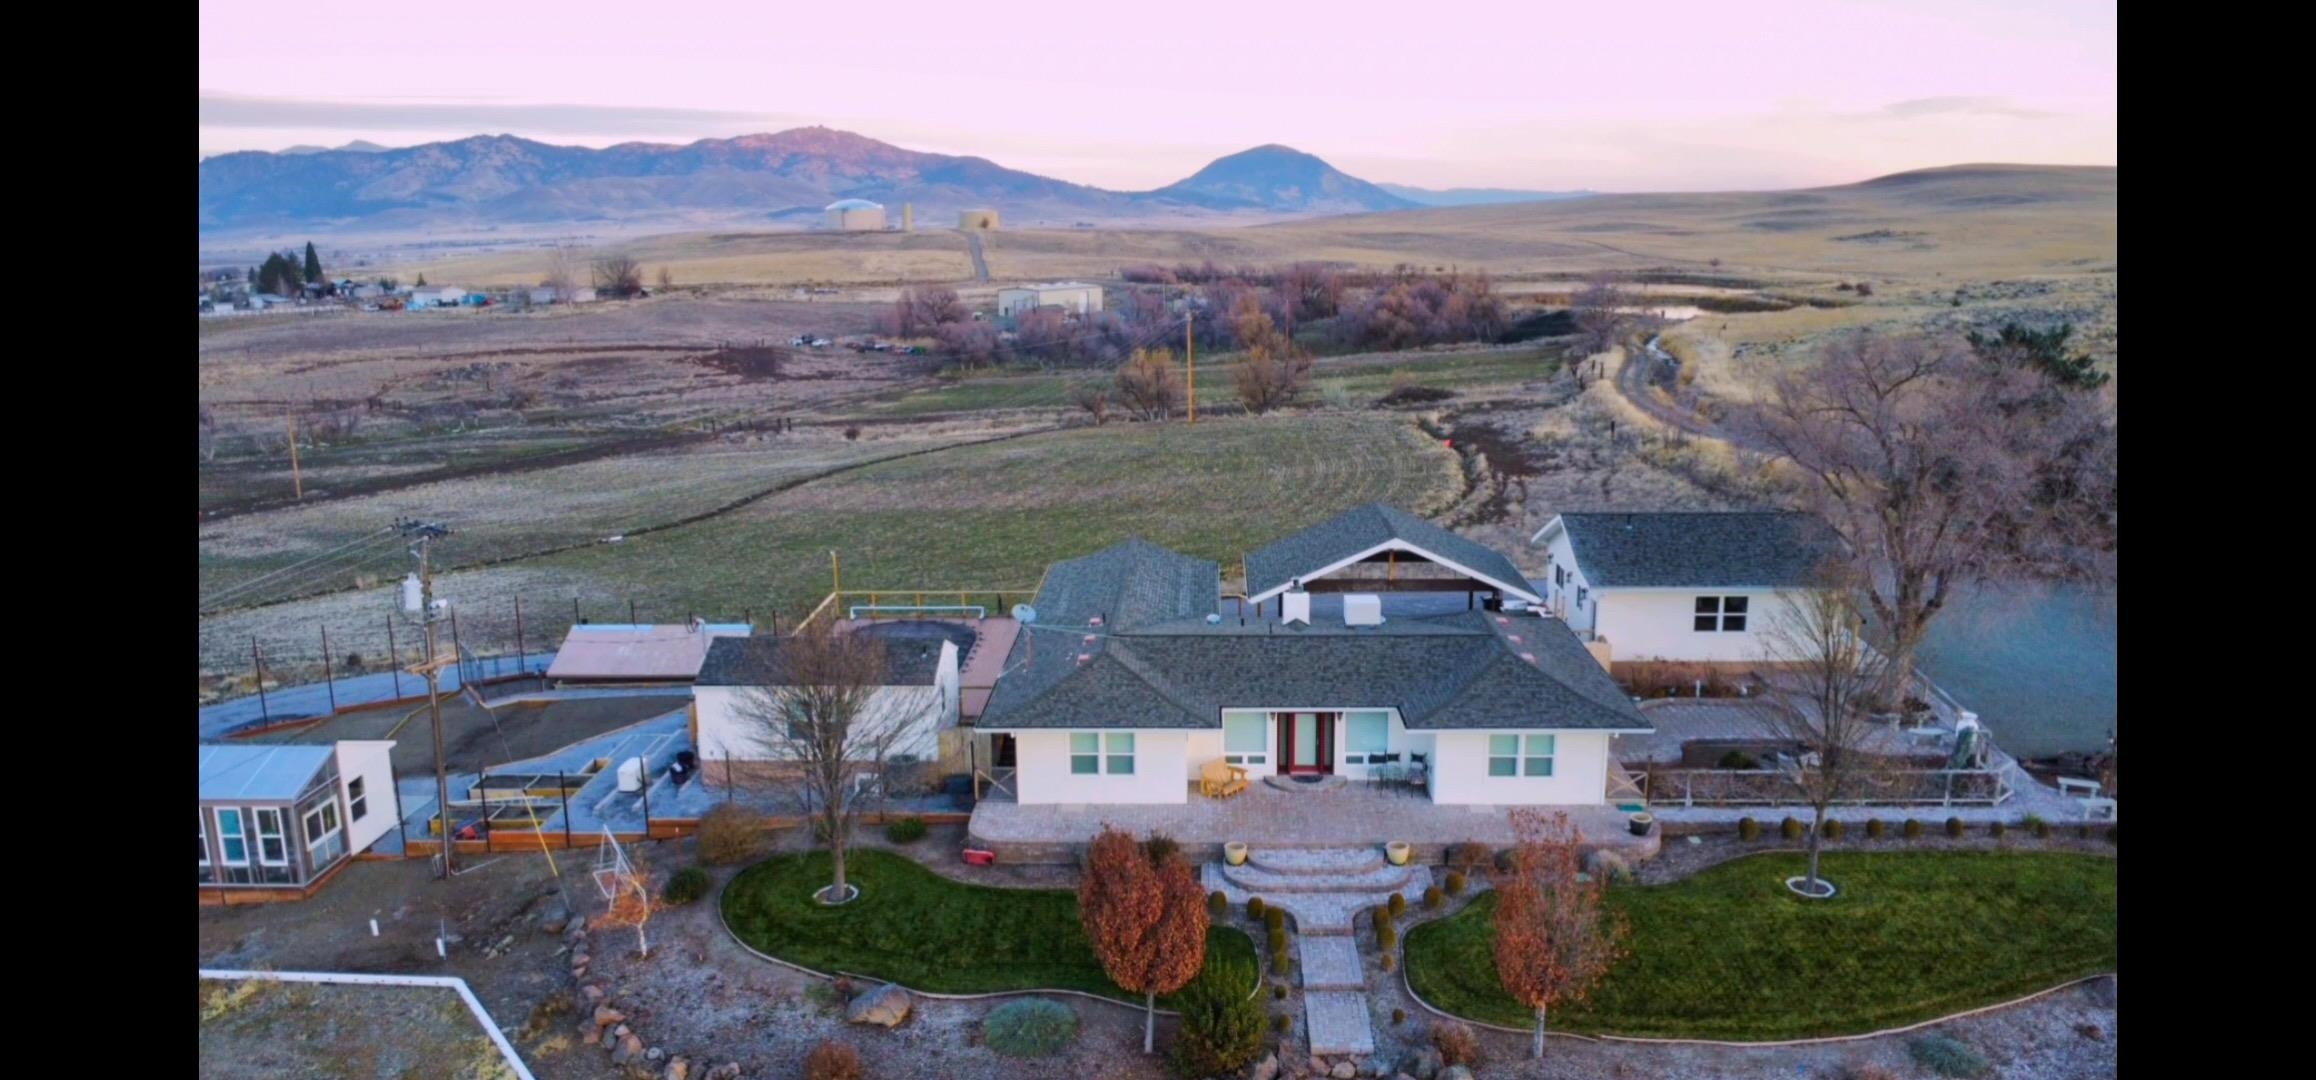 Beautiful country home on top of a hill W/ commanding views. 8+ acres with 360* views of Shasta Valley, Mt Shasta the Eddys and Black Butte, located ¼ mi East of Montague Proper.  Remodeled in 2011 again in 2019. This home offers 3 bedrooms, (one currently used as an office) and 2 full baths. The custom kitchen is designed to entertain, and it truly flows. SS appliances with granite countertops. Center island is 5' x11' includes a second sink.  The living room has a wall devoted to windows for ever changing views of Mt Shasta, a fireplace with insert to cozy up to, ak floors. The primary bedroom has walk in closets with his and her built ins, a beautiful shower for two, wood floors and alder ceiling. On the west side is the pool area, the pool is 15x30 the pool house with the deck and a fence surrounding it all.  Below the pool area is a fenced in deer proof back yard (fencing panels to be installed) with 16x16 greenhouse and hobby shed and large dog kennel. Below the yard is a 4 stall 40x30 metal barn with power, water and concrete center floor. Arena with attached runway to pasture.  Two 16x16 animal shelter. Another dwelling/ Studio w/ full bath, kitchen and mini split system.